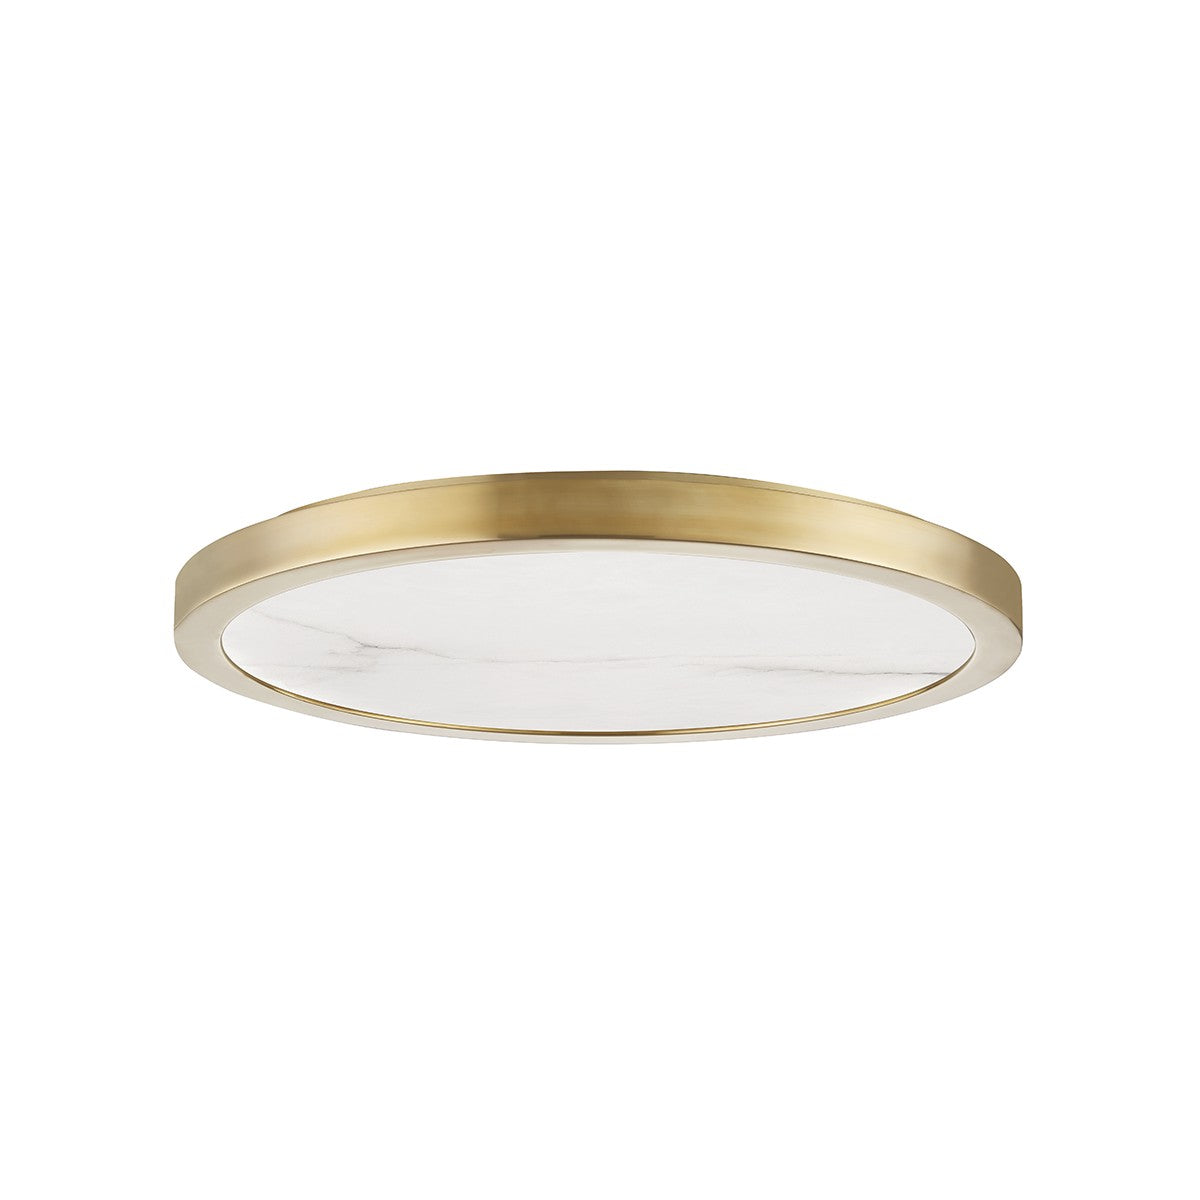 Hudson Valley - 4318-AGB - LED Flush Mount - Woodhaven - Aged Brass